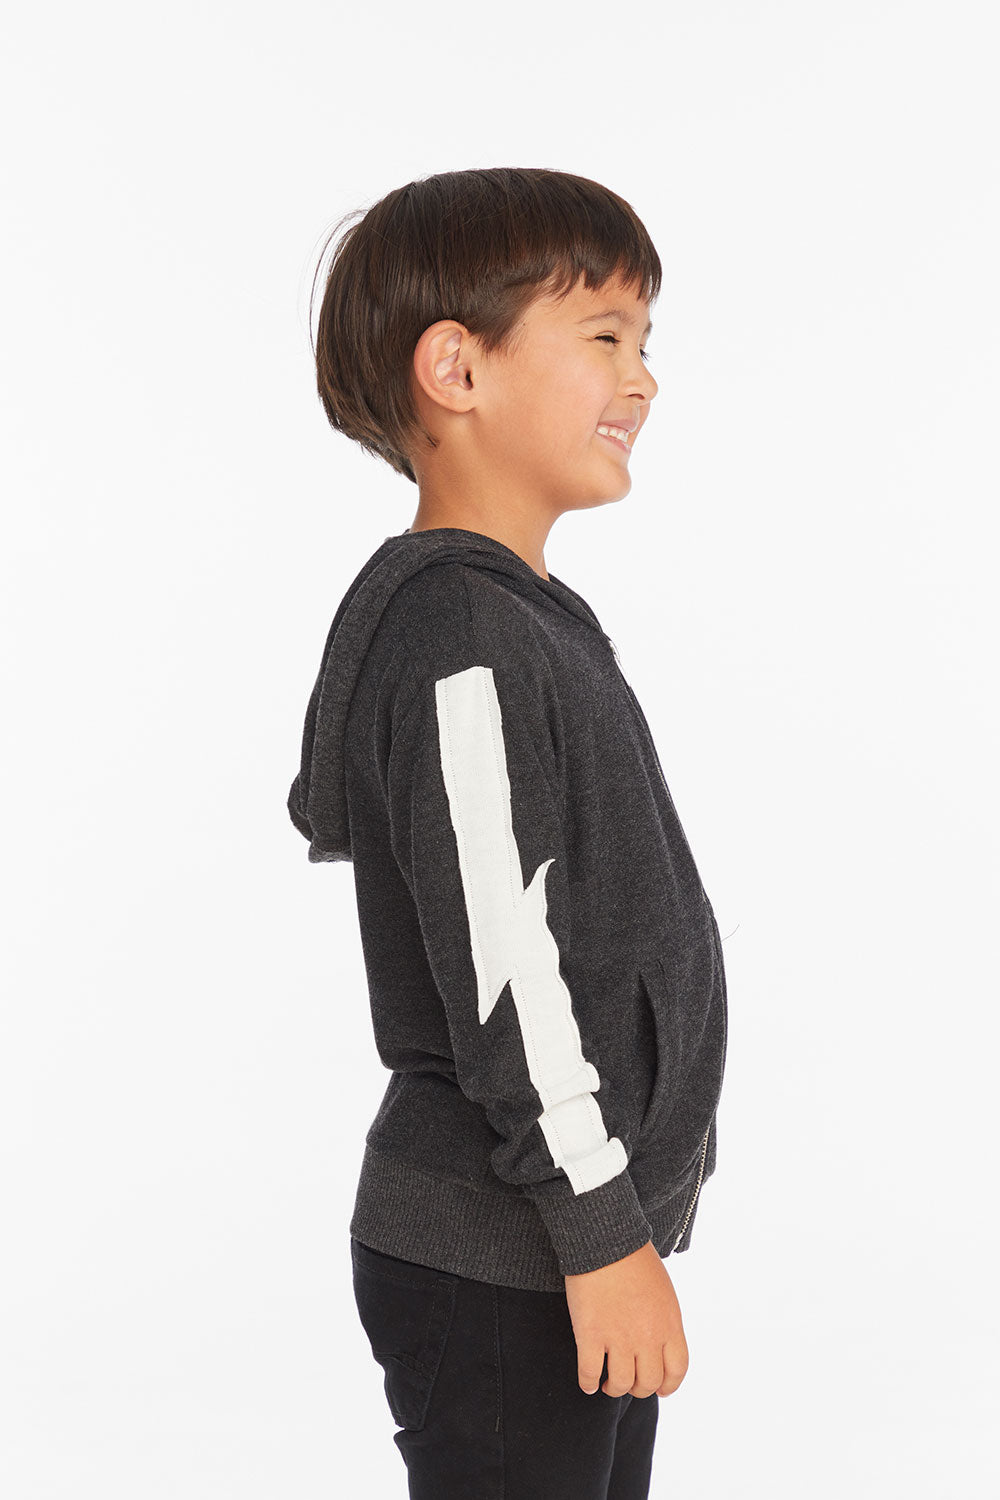 Bolt Licorice Long Sleeve Zip Up Hoodie Boys chaserbrand